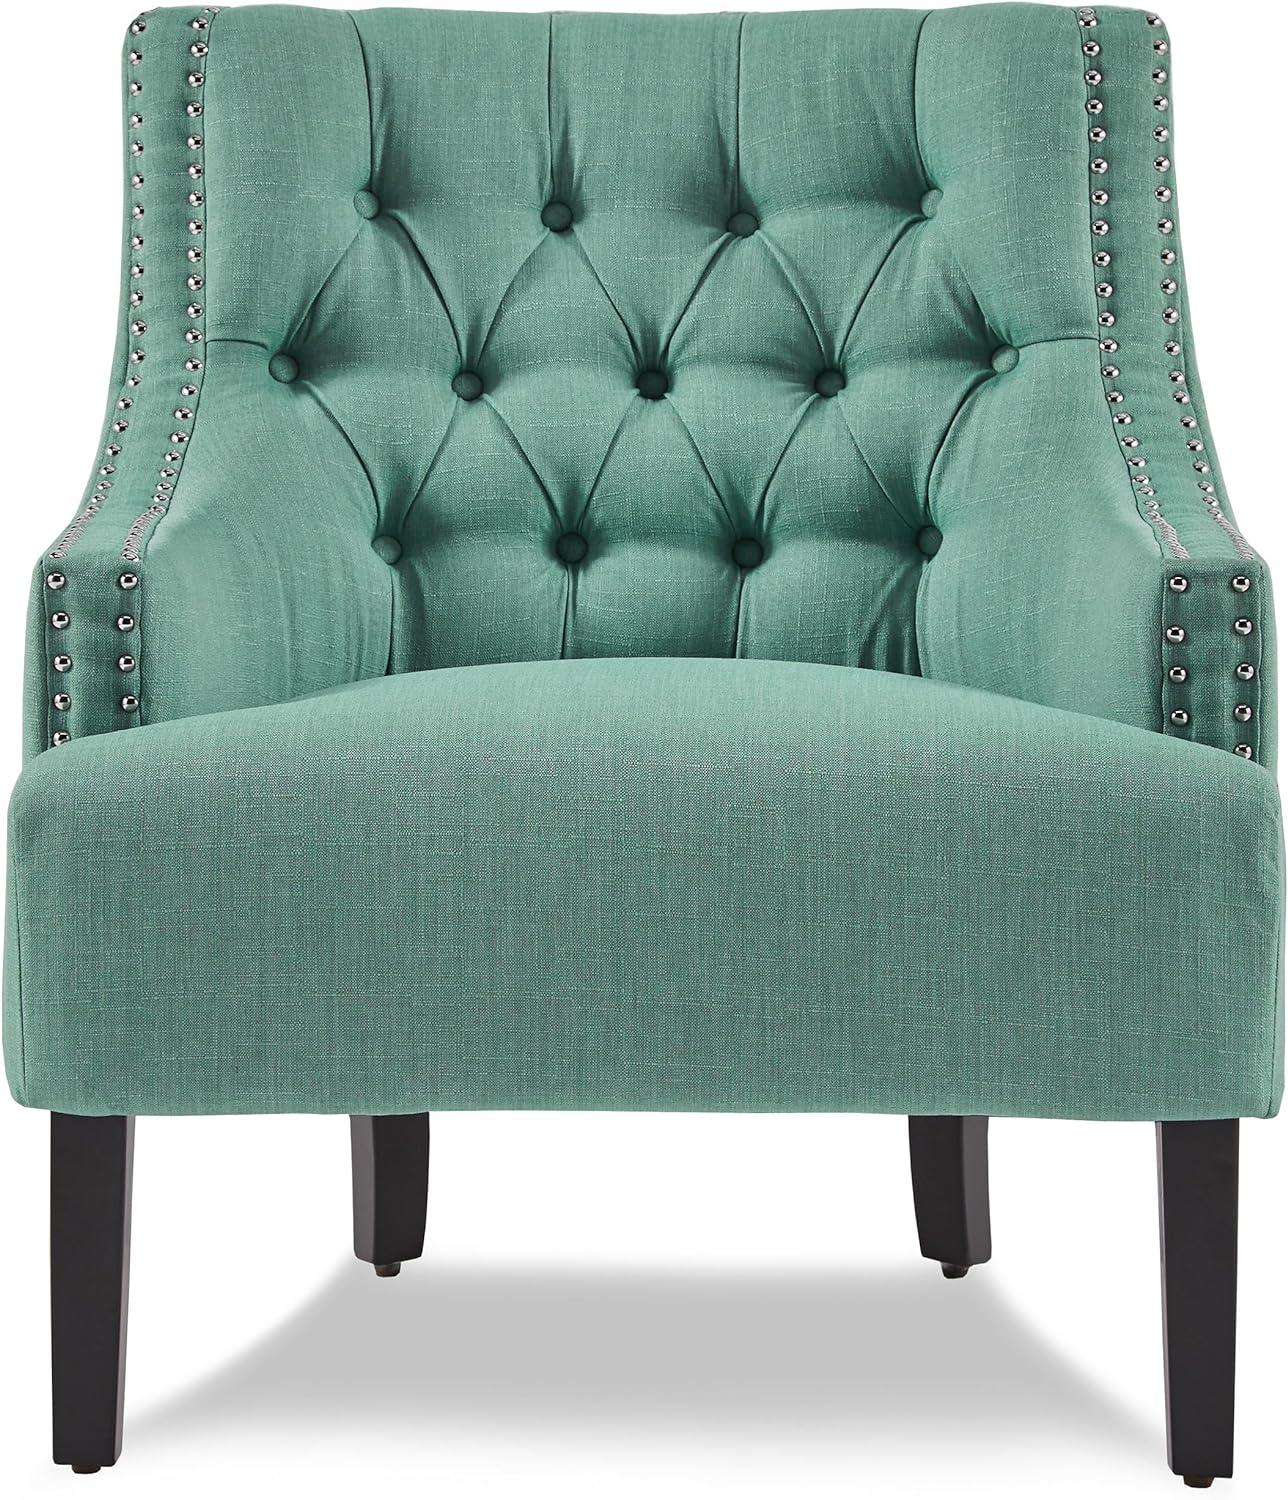 Teal Transitional Diamond Tufted Accent Chair with Nailhead Trim